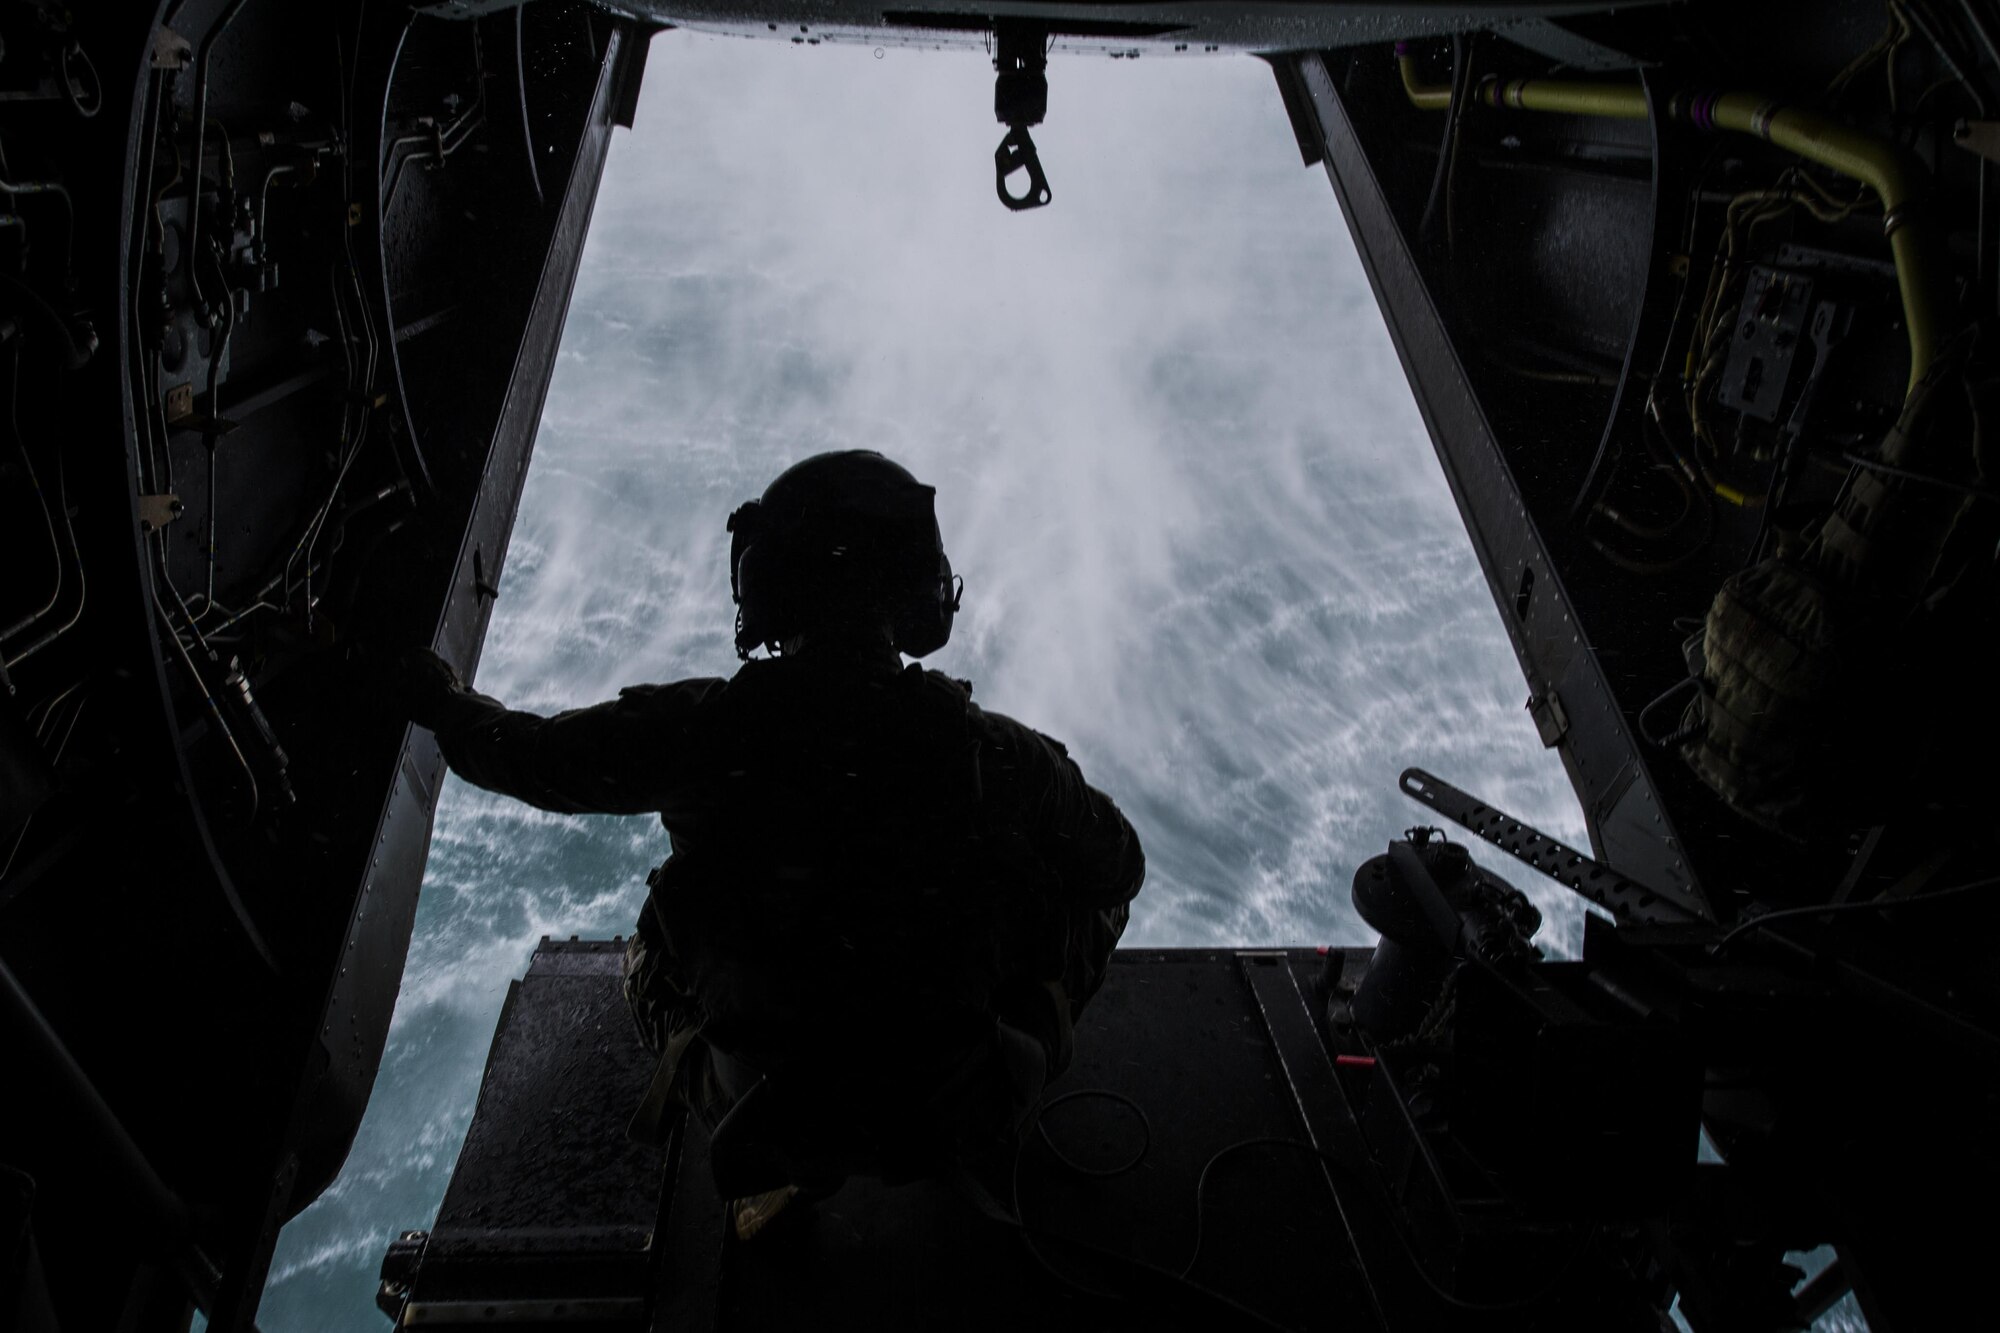 A flight engineer with the 8th Special Operations Squadron watches as he hovers over a pond in a CV-22 Osprey tiltrotor aircraft during water training at Eglin Range, Fla., Nov. 30, 2016. Air Commandos with the 8th SOS conduct water training as a way to maintain relevance for tomorrow and ensure readiness for global special operations. (U.S. Air Force photo by Airman 1st Class Joseph Pick)